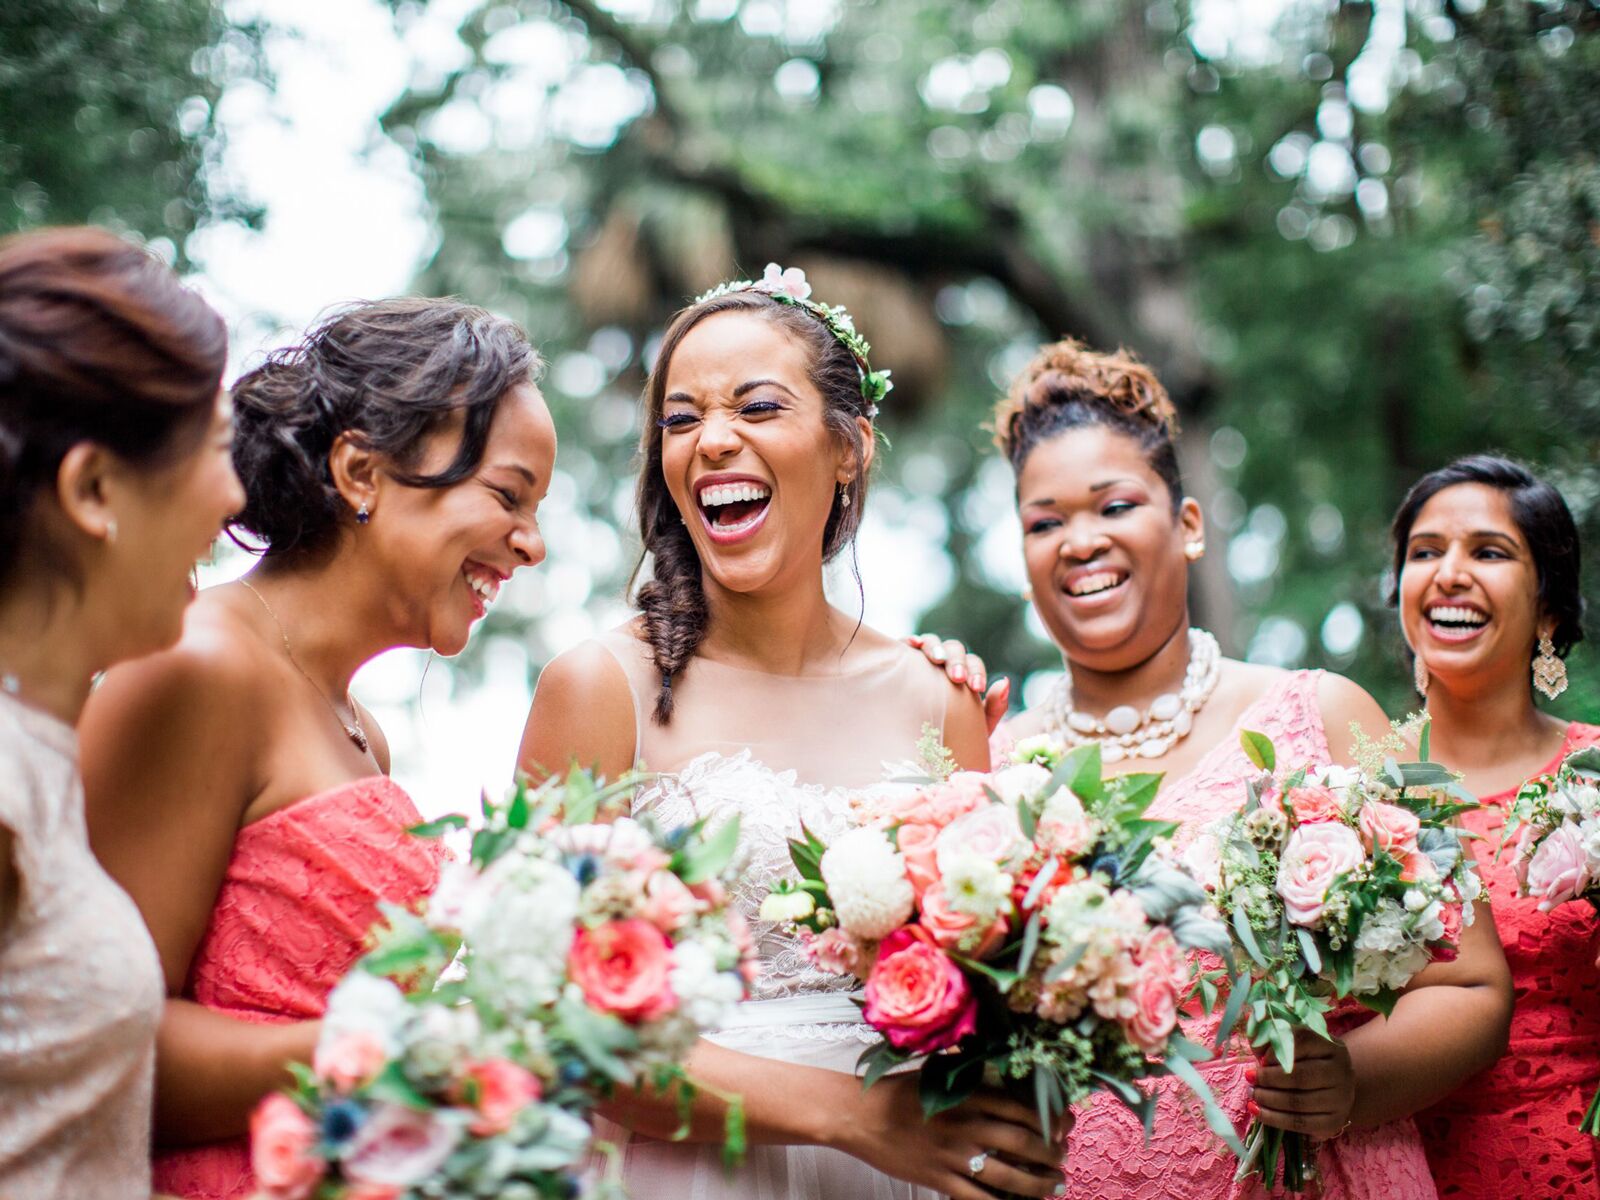 Brides with bridesmaids wearing mismatched accessories